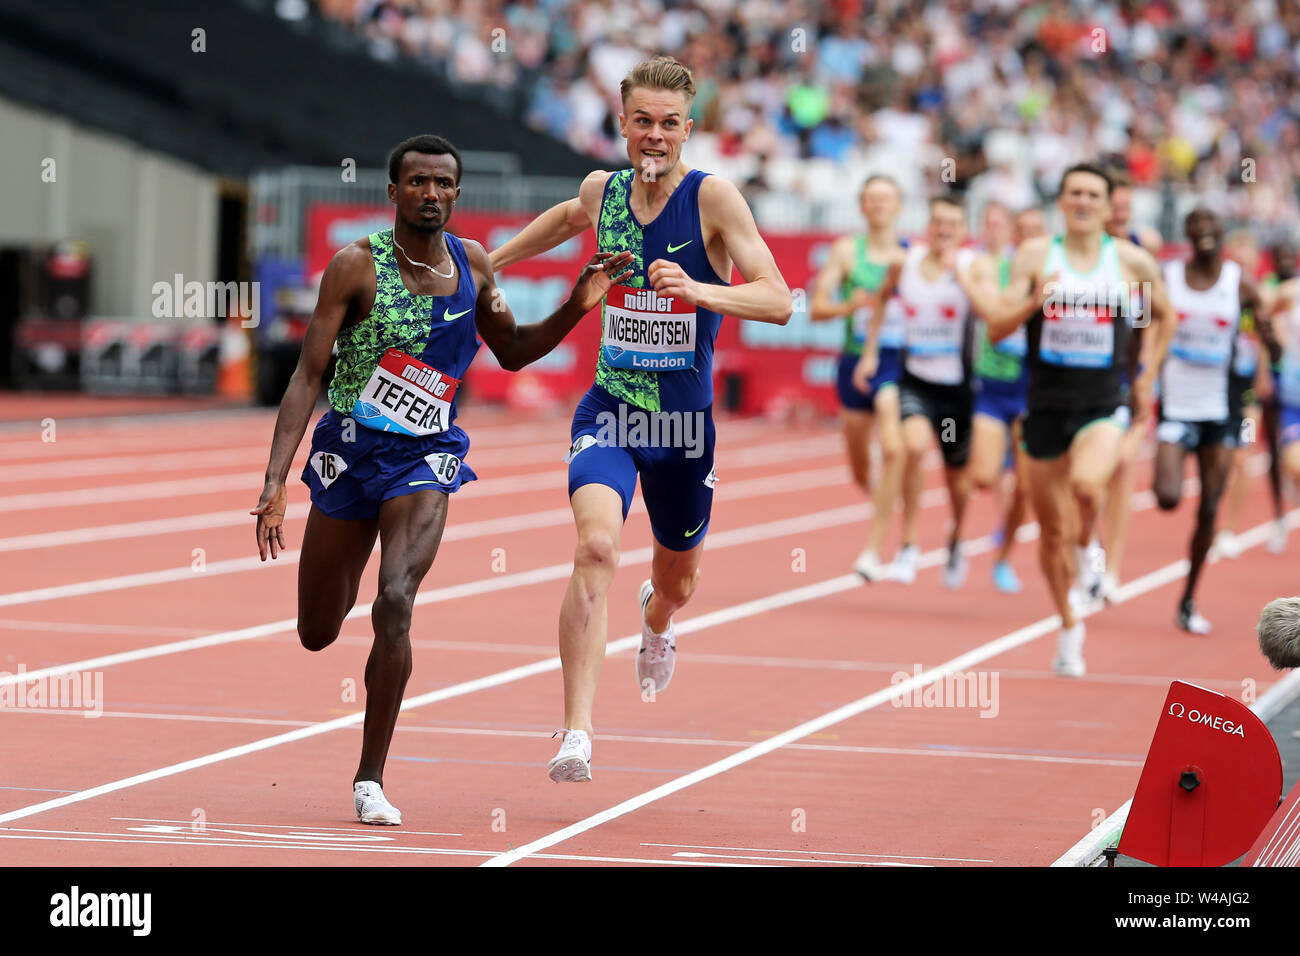 London, UK. 21st July 19. Samuel TEFERA (Ethiopia), and Filip INGEBRIGTSEN (Norway), crossing the finish line in the Emsley Carr Mile Final at the 2019, IAAF Diamond League, Anniversary Games, Queen Elizabeth Olympic Park, Stratford, London, UK. Credit: Simon Balson/Alamy Live News Stock Photo